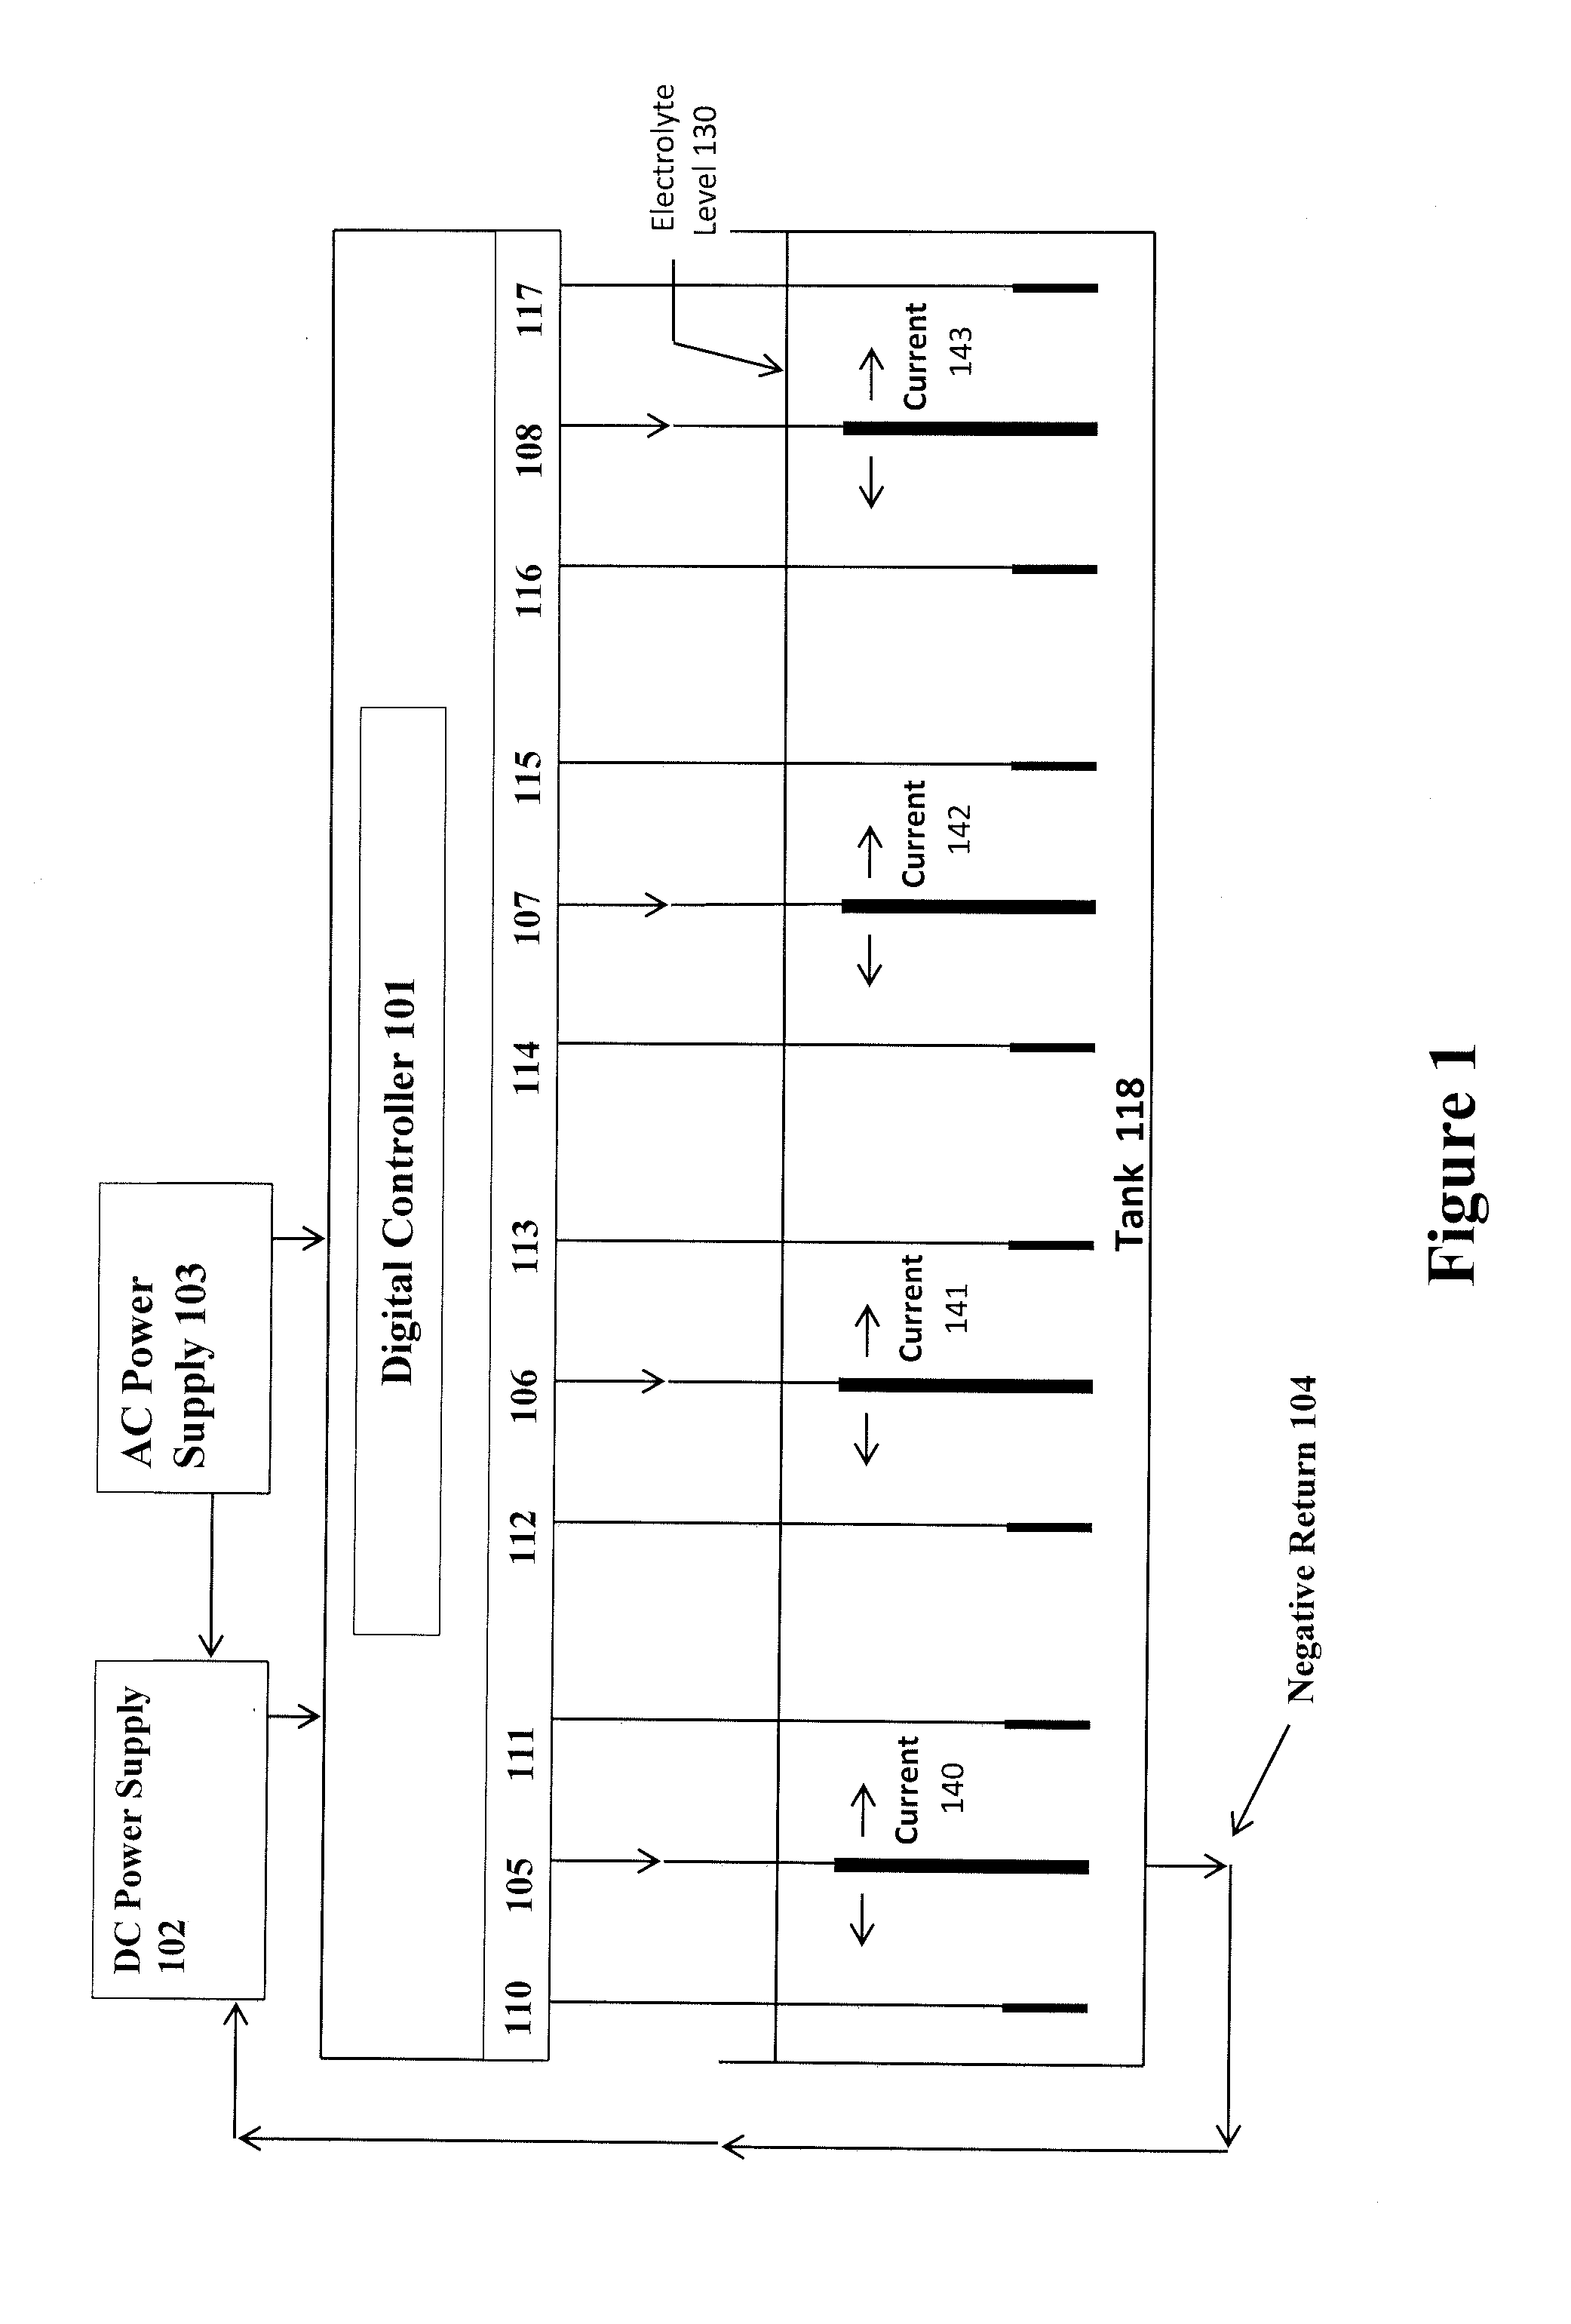 Digitally controlled corrosion protection system and method